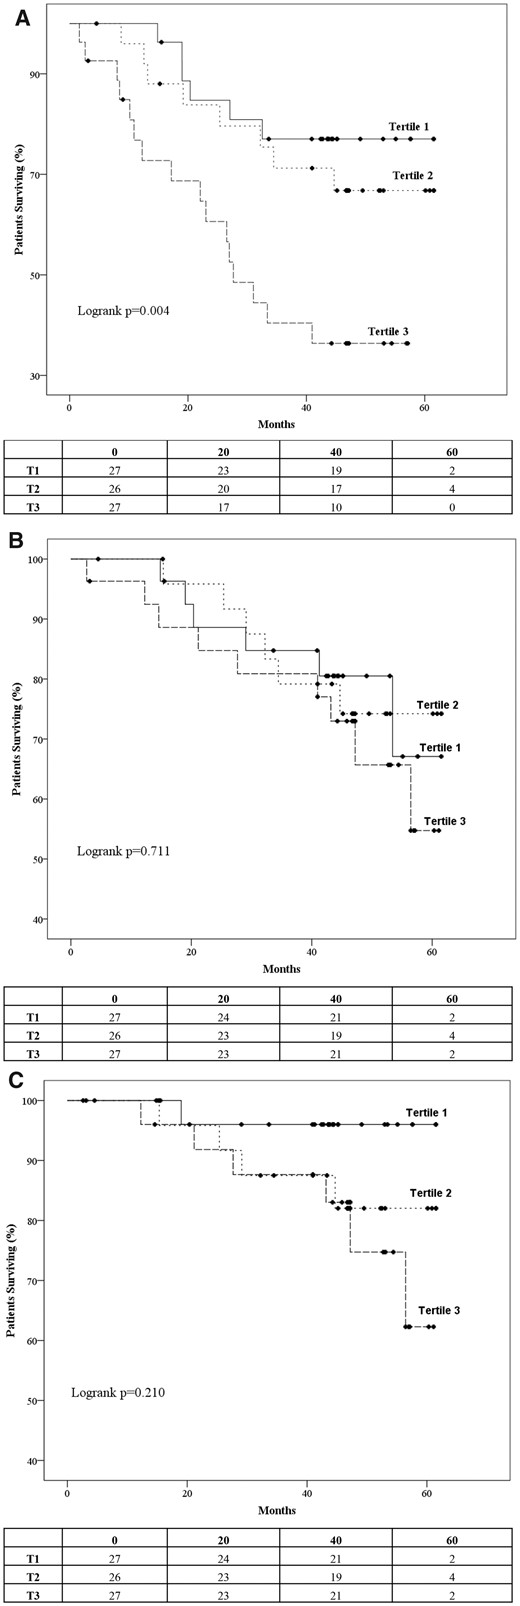 Kaplan–Meier survival curves and life tables for the occurrence of the (A) primary endpoints (all-cause death, or non-fatal MI or non-fatal stroke or coronary revascularization or hospitalization for heart failure or AF) and the secondary endpoints, (B) all-cause mortality and (C) cardiovascular mortality in the tertiles of sclerostin levels.